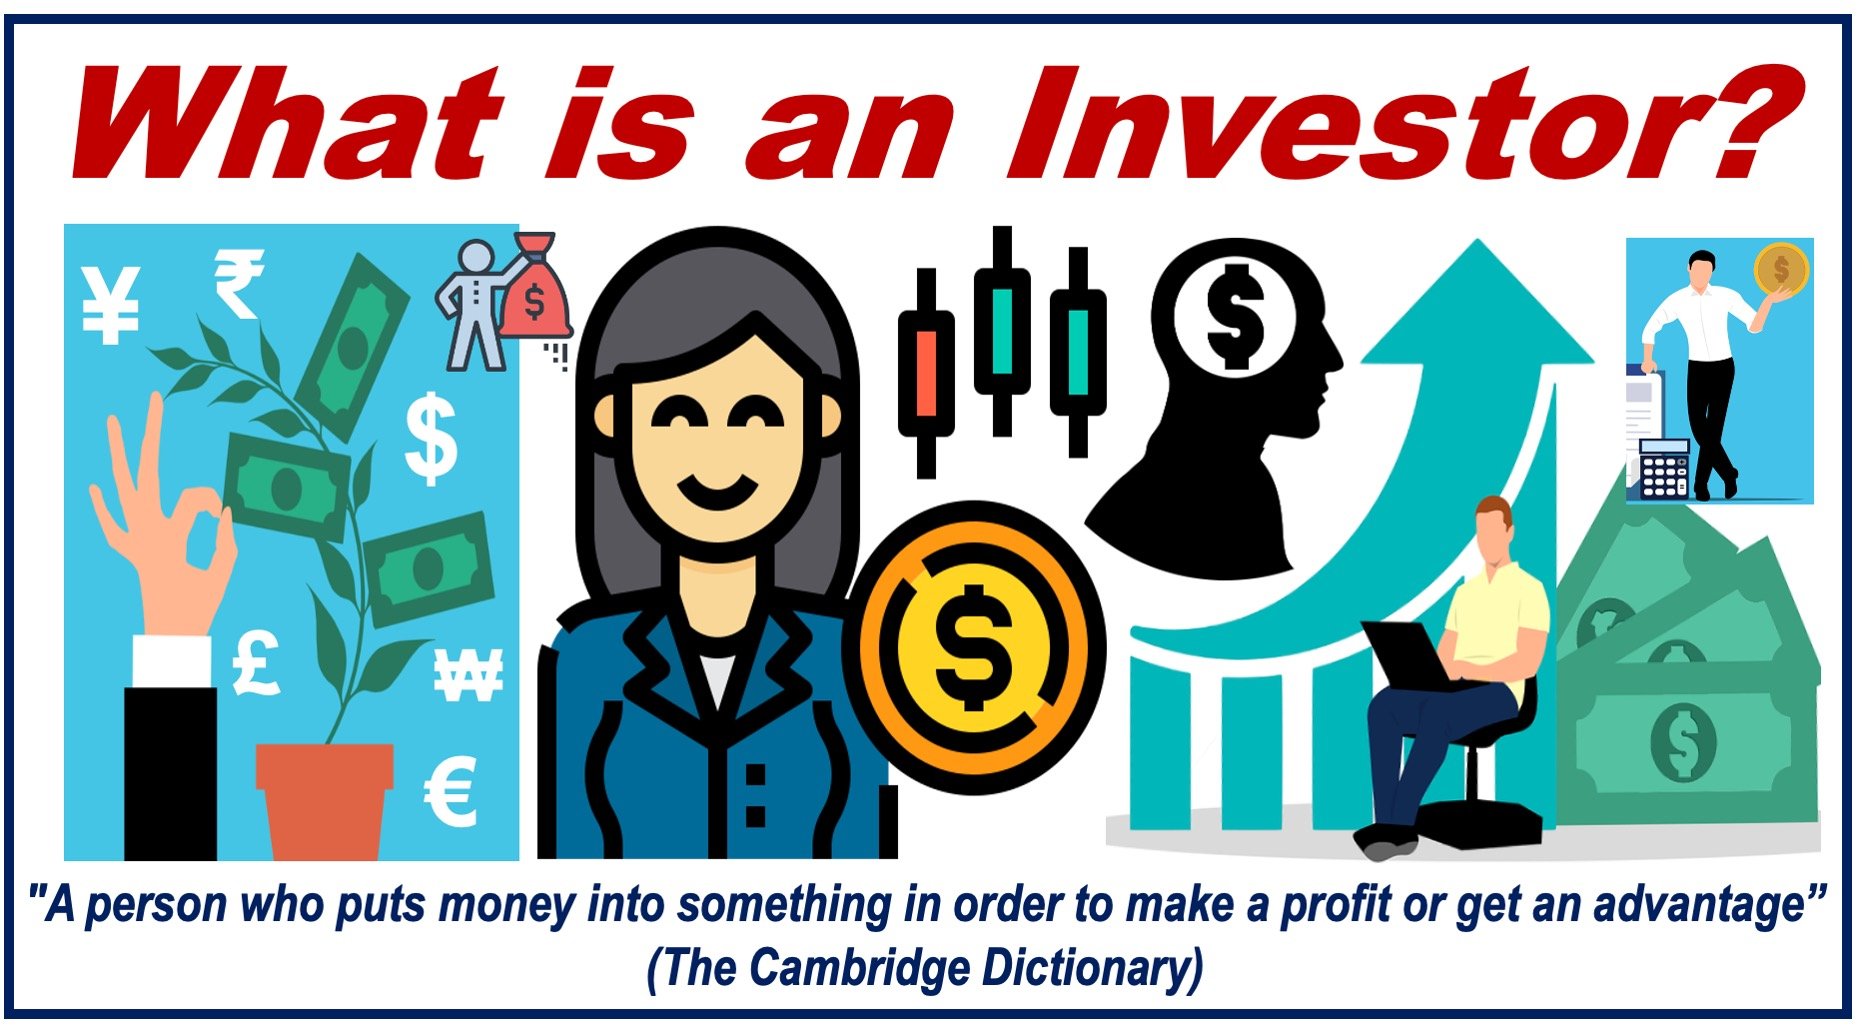 Several images of people investing money plus definition of investor